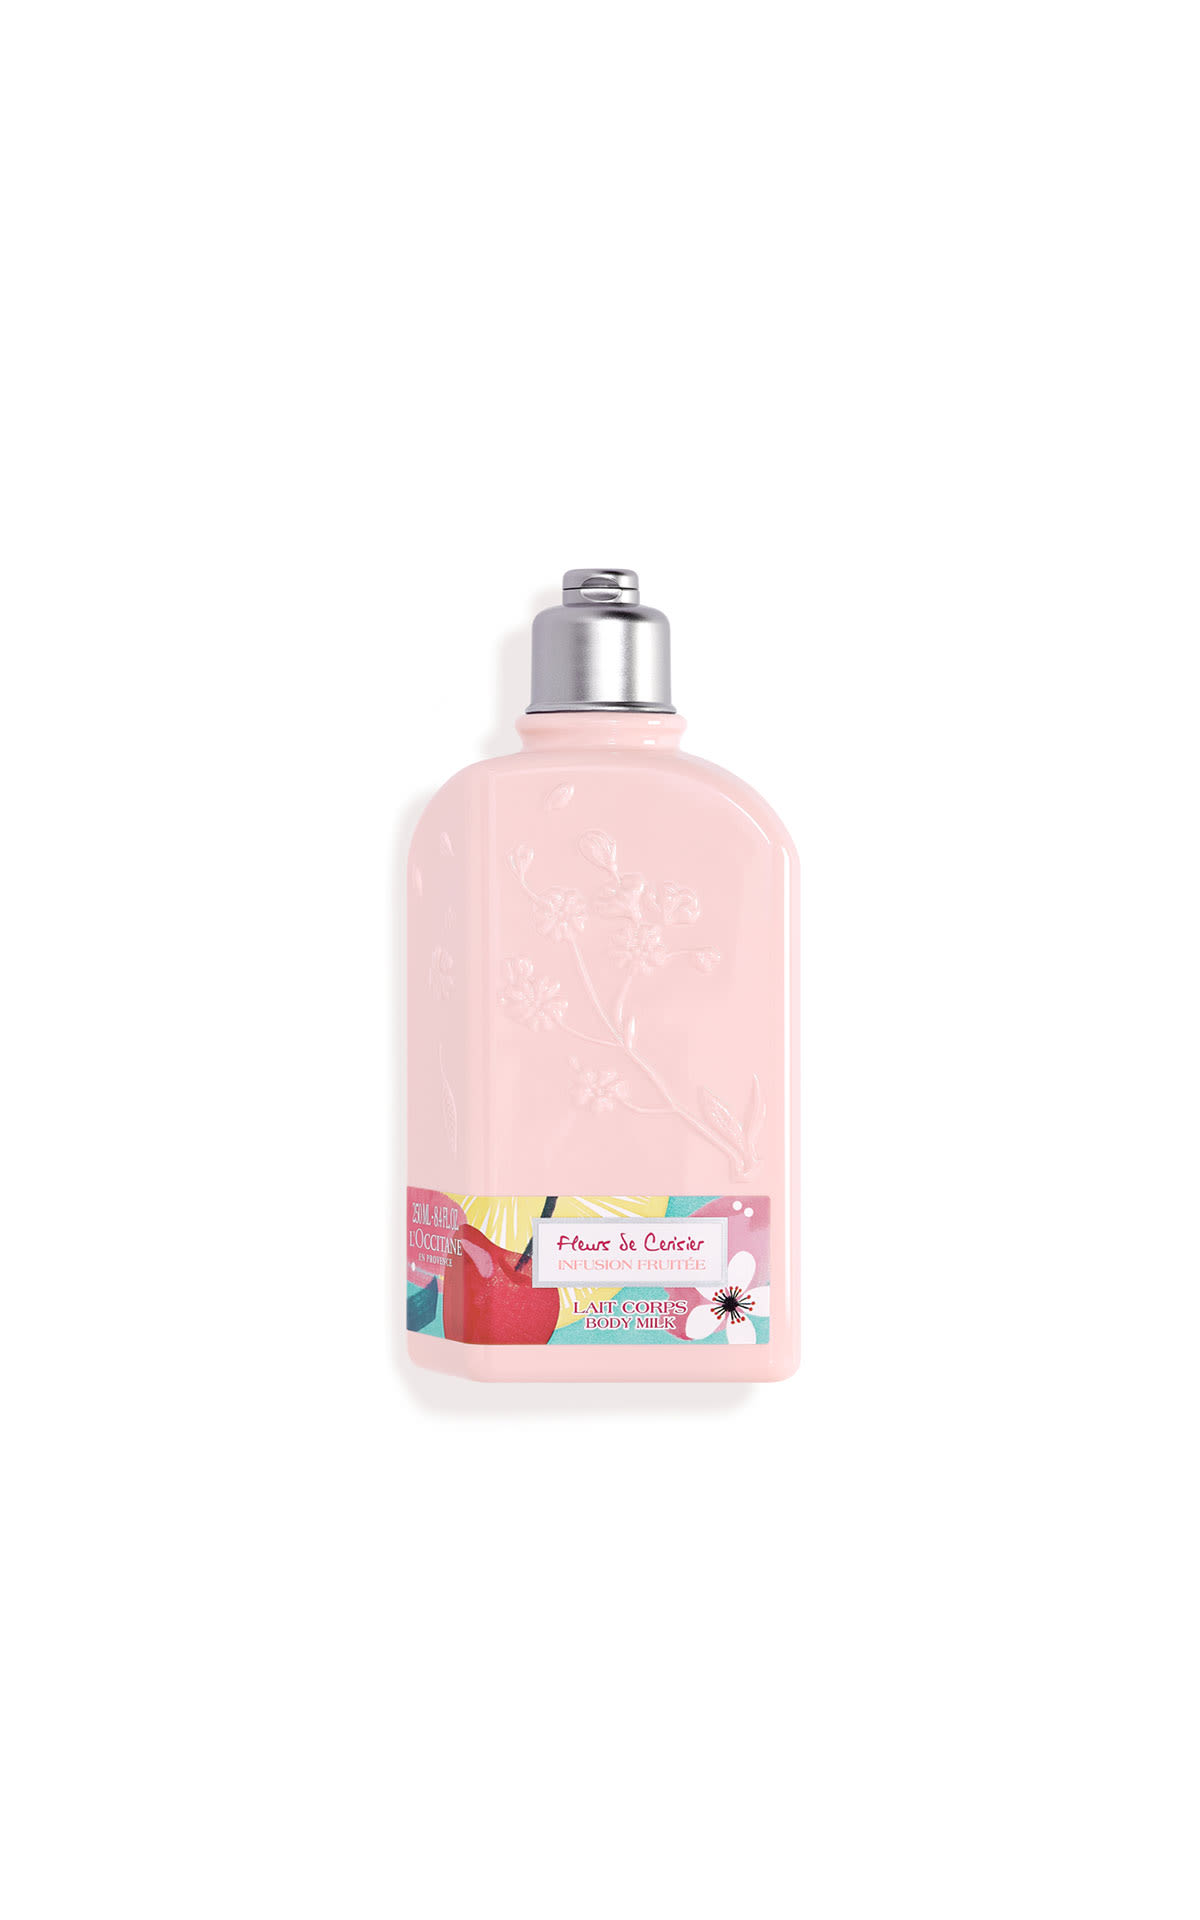 L'Occitane Cherry infusions body lotion from Bicester Village